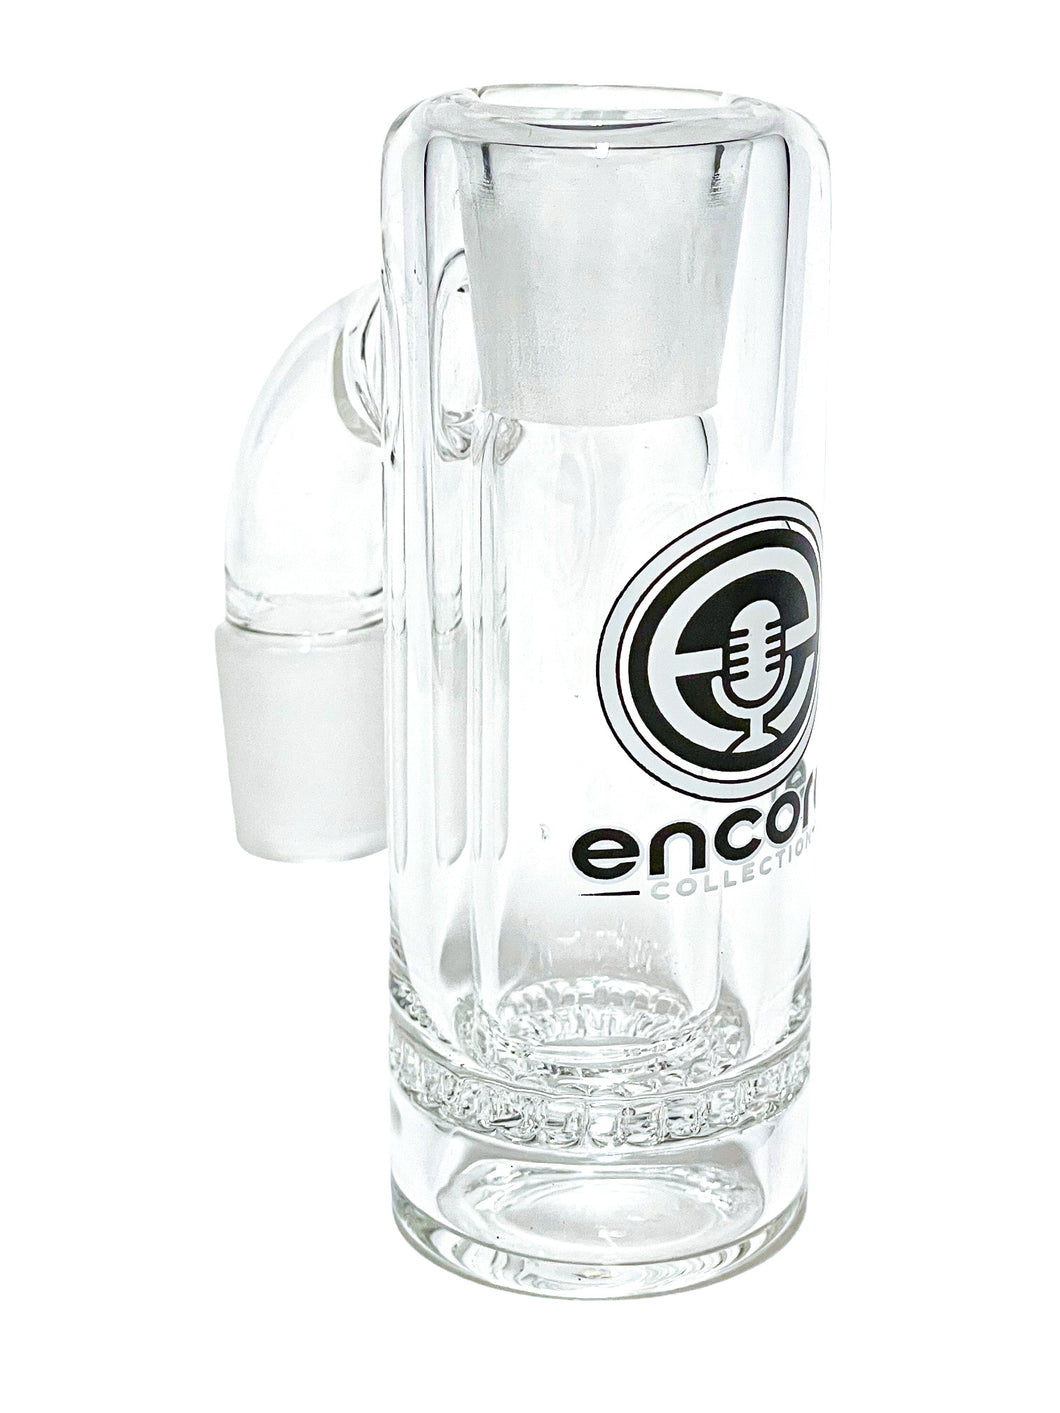 A 18mm 90 Degree Thin Flush Honeycomb Ash Catcher with a white Encore logo.